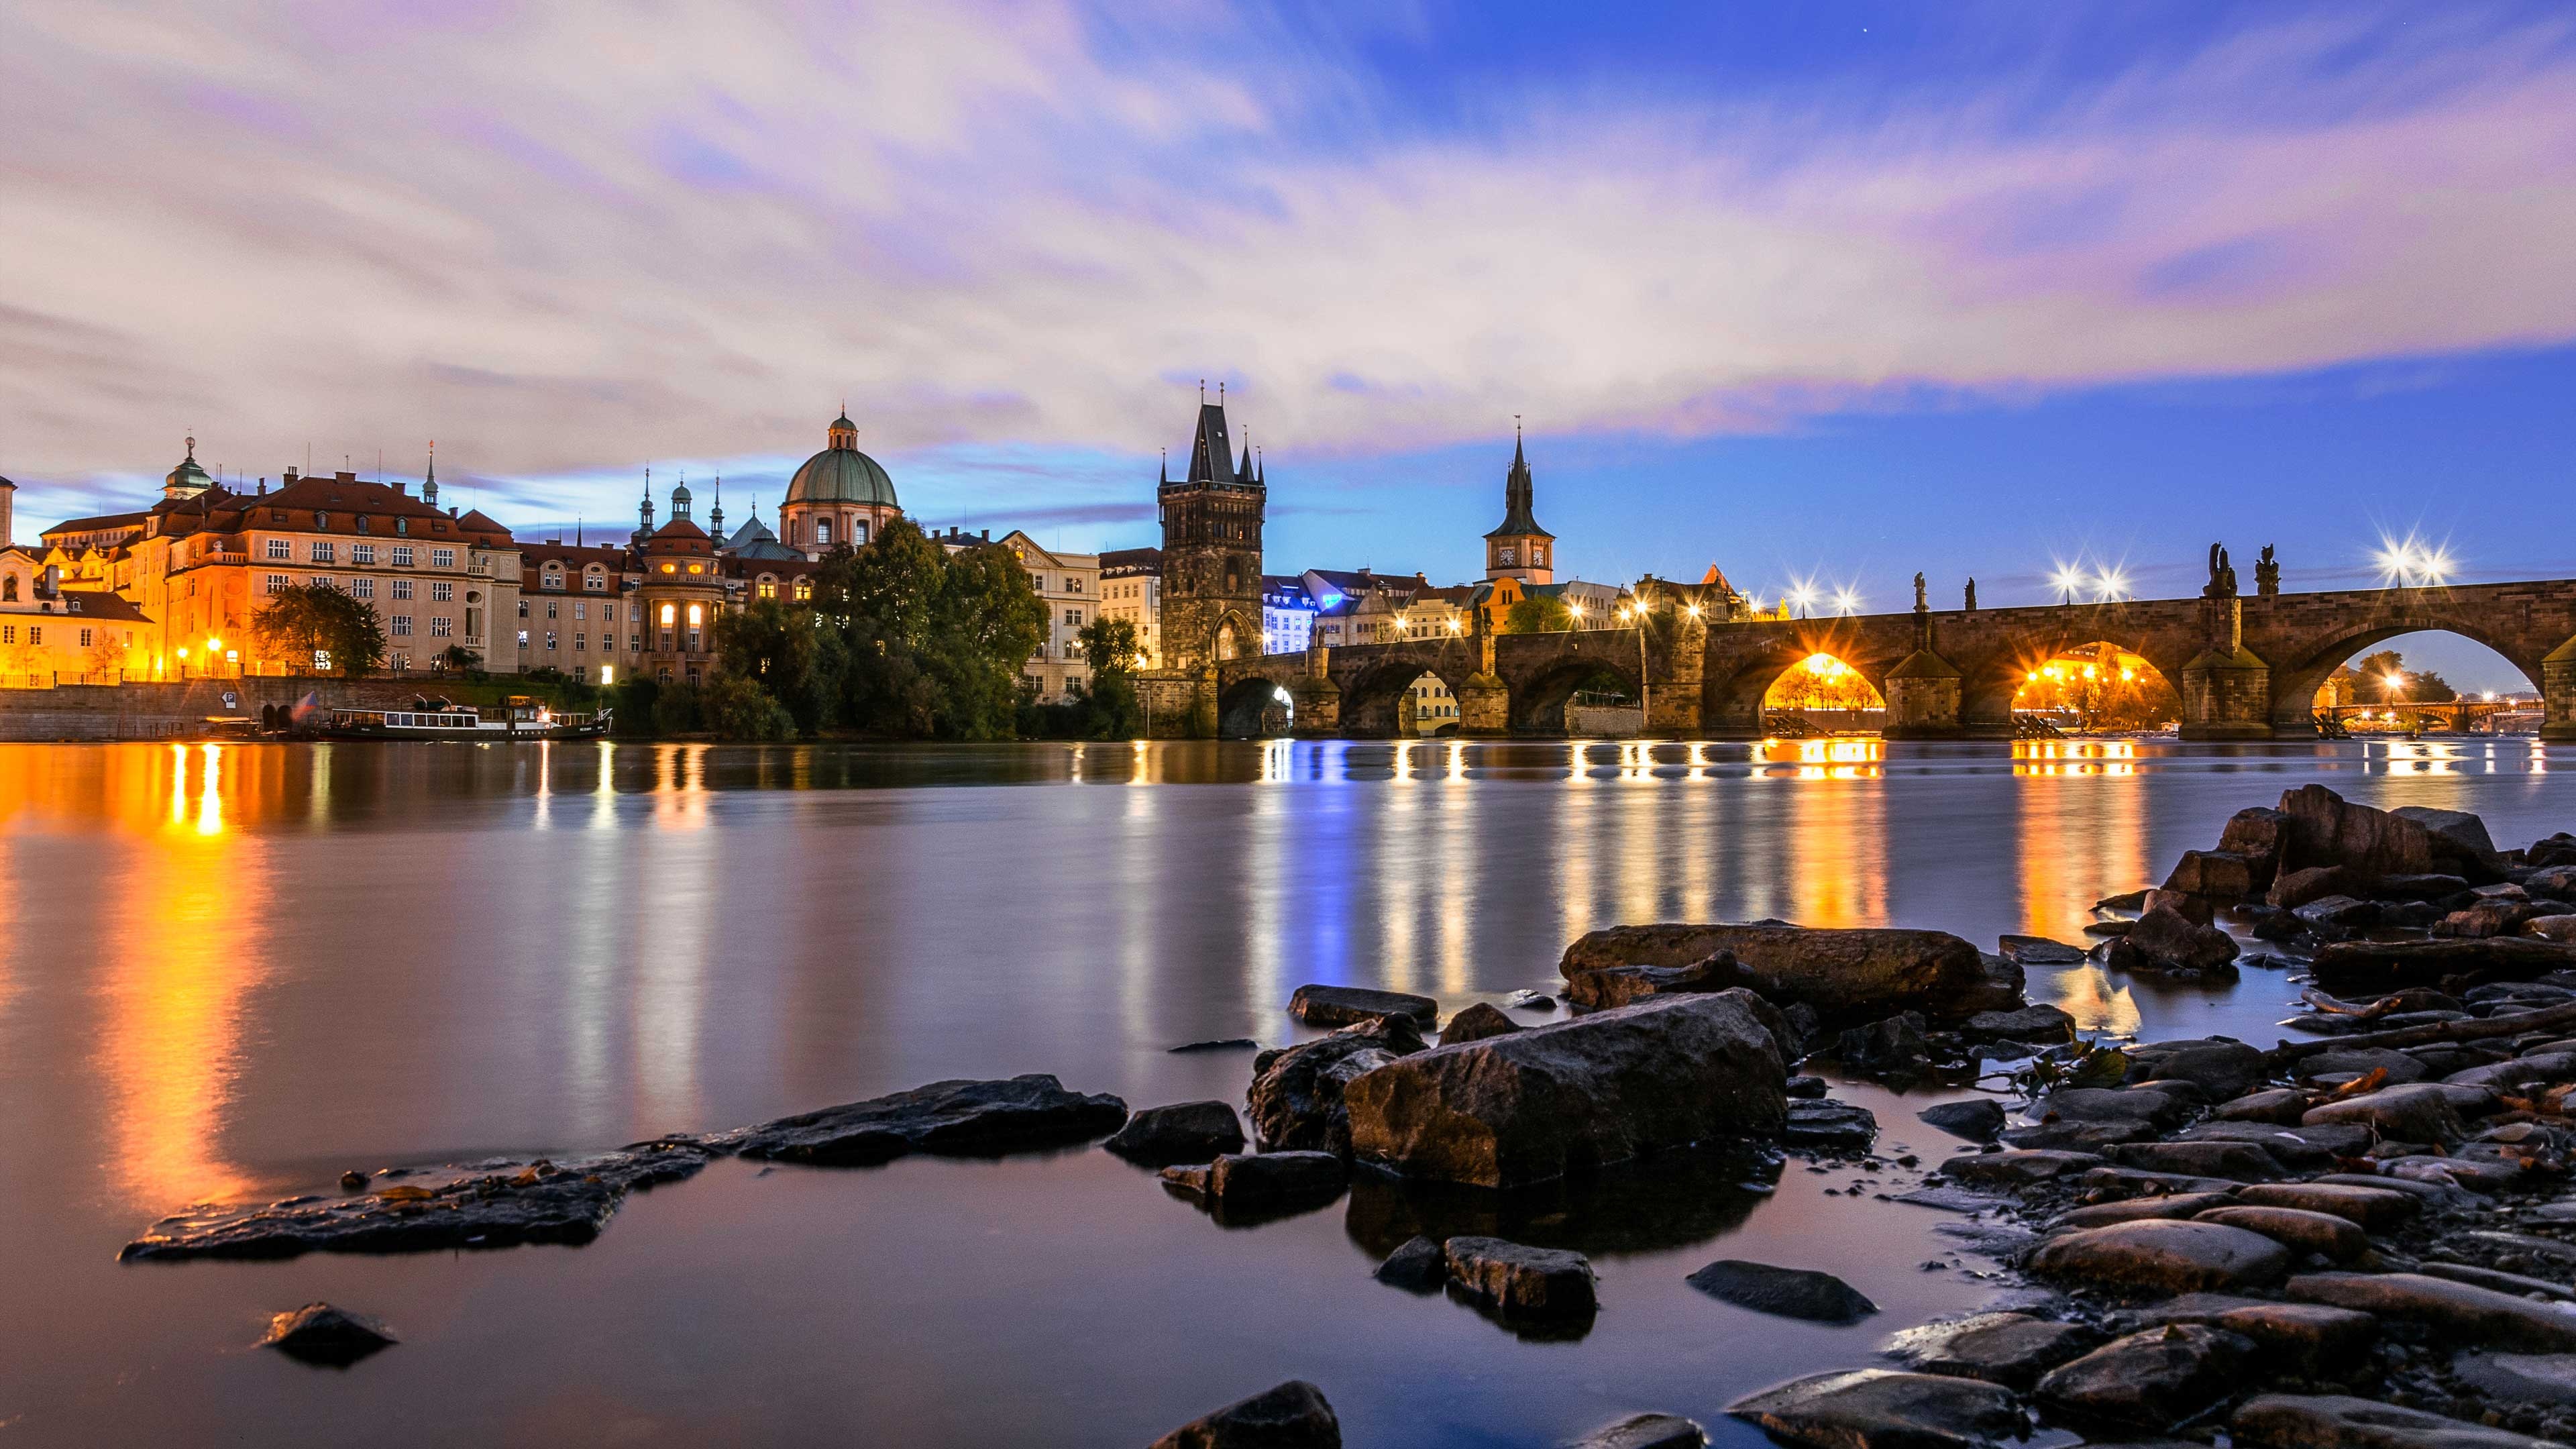 Prague: An important city to the Habsburg monarchy and Austro-Hungarian Empire. 3840x2160 4K Background.